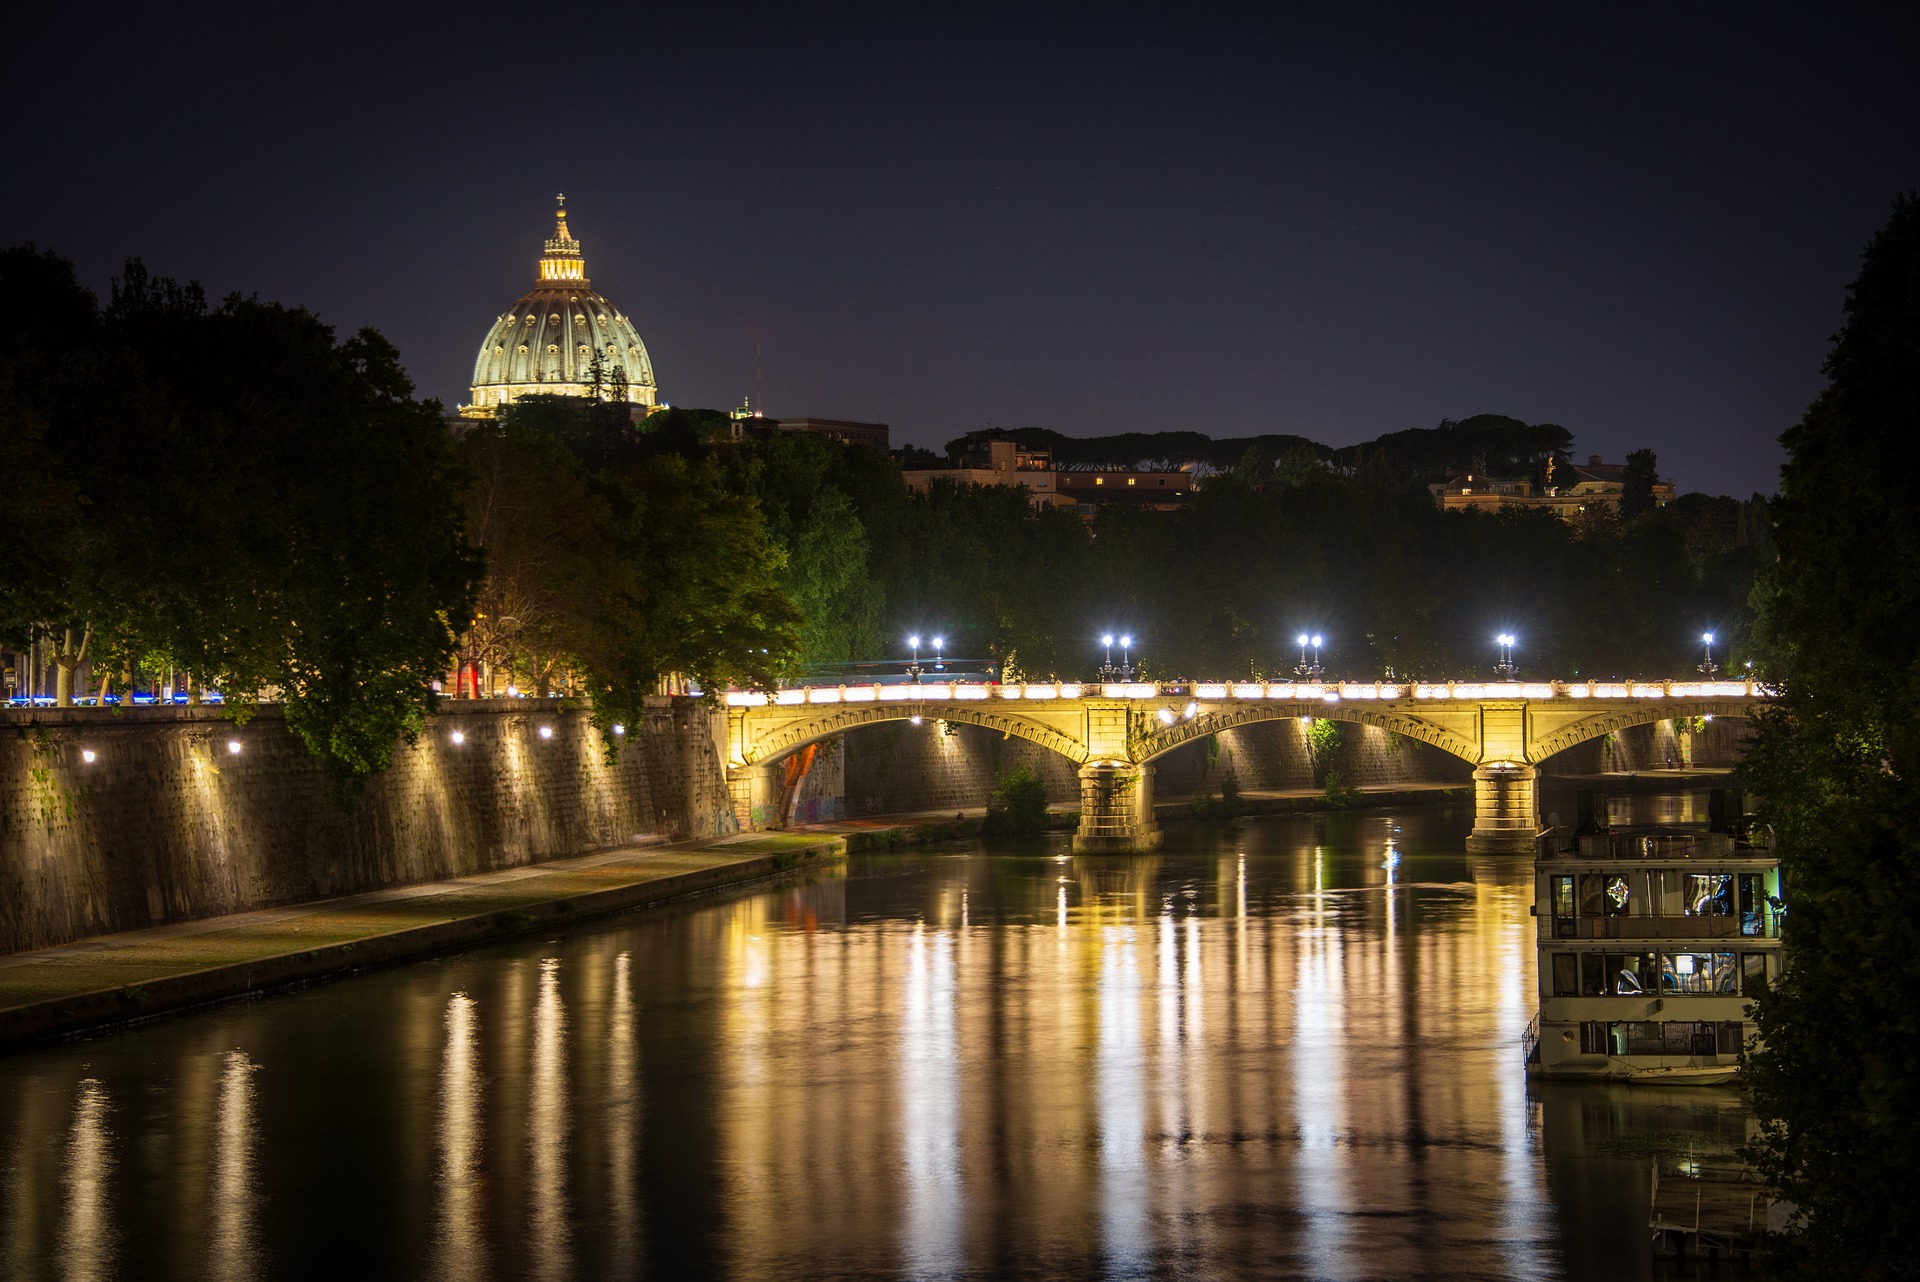 St. Peter's Basilica from Tever by night - Vatican